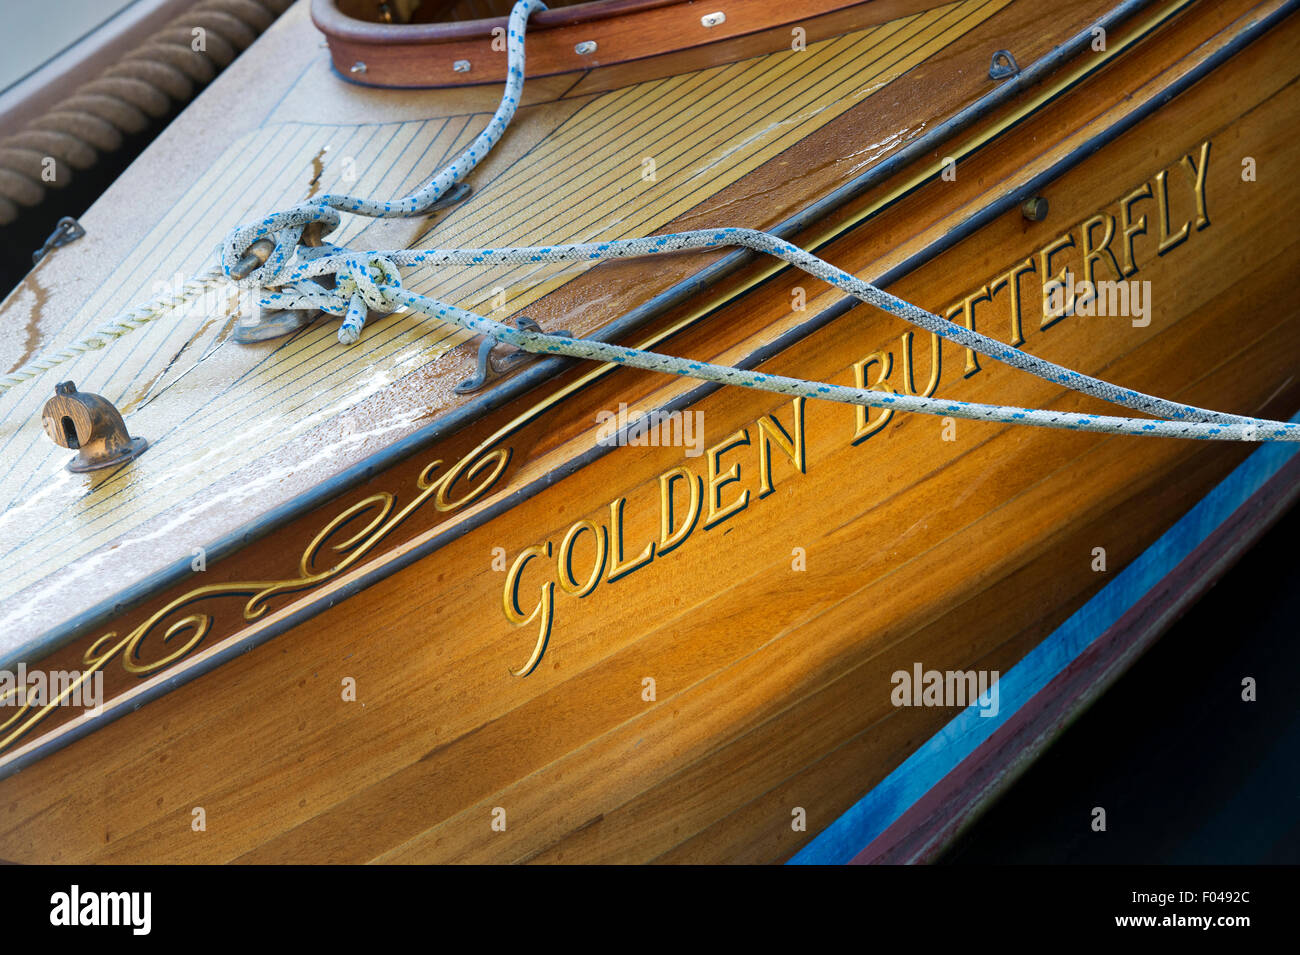 Electric Gentleman's launch 'Golden Butterfly' moored at Henley on Thames, Oxfordshire, England Stock Photo